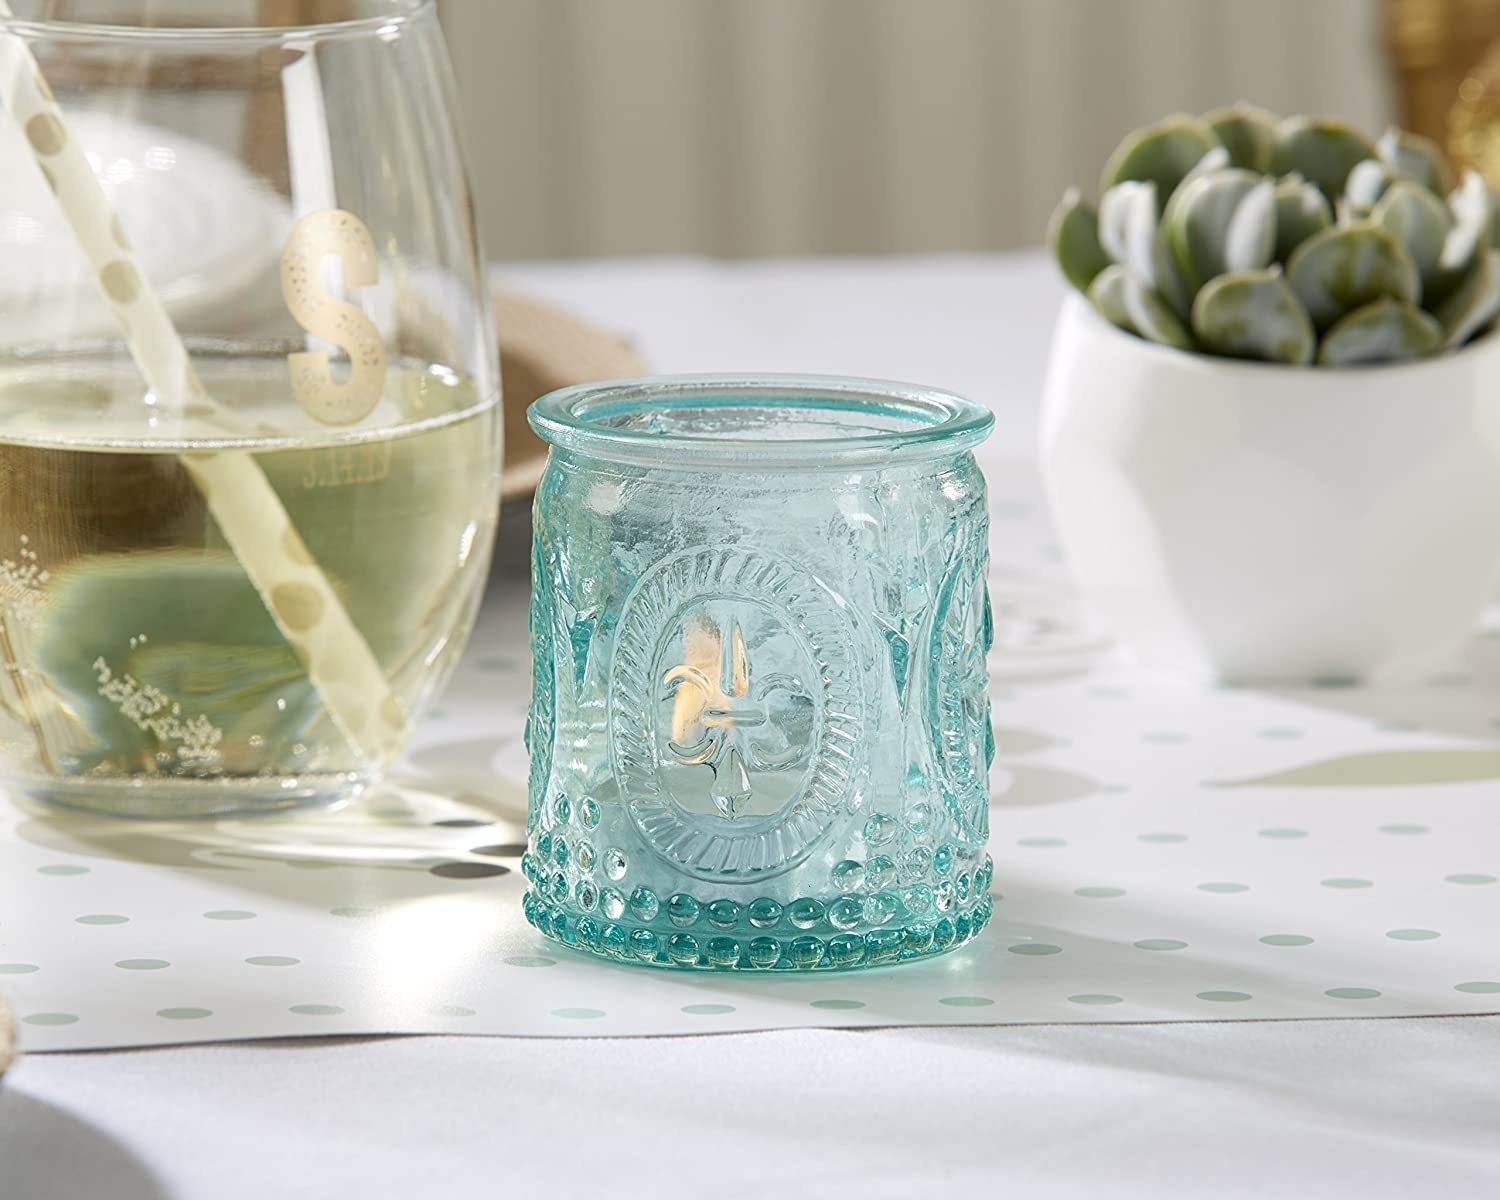 The glass tea light holder on a table with a candle in it